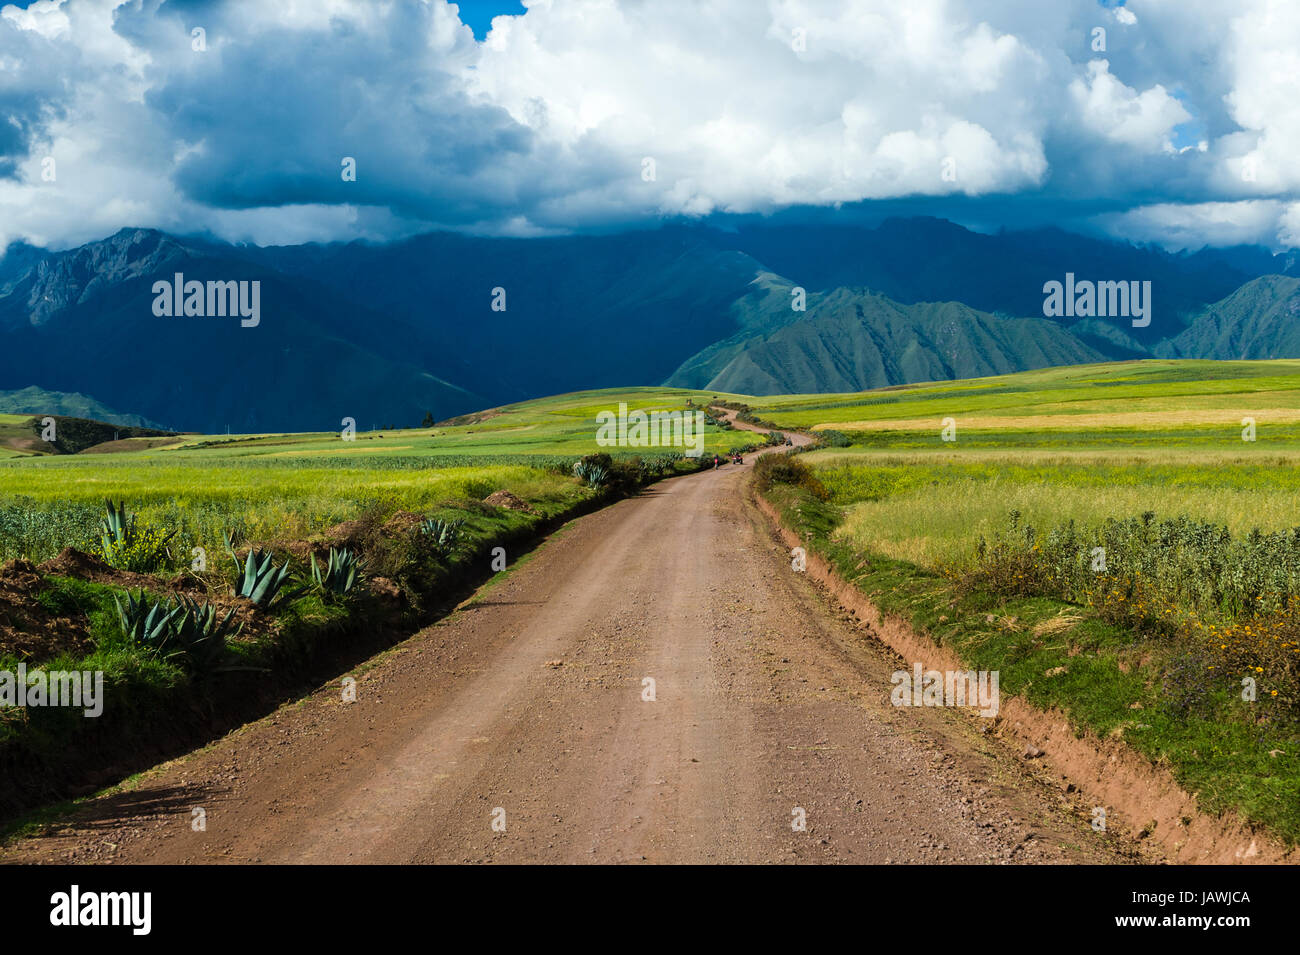 A dirt road crosses a lush green high altitude farming plateau in the Andes mountains. Stock Photo